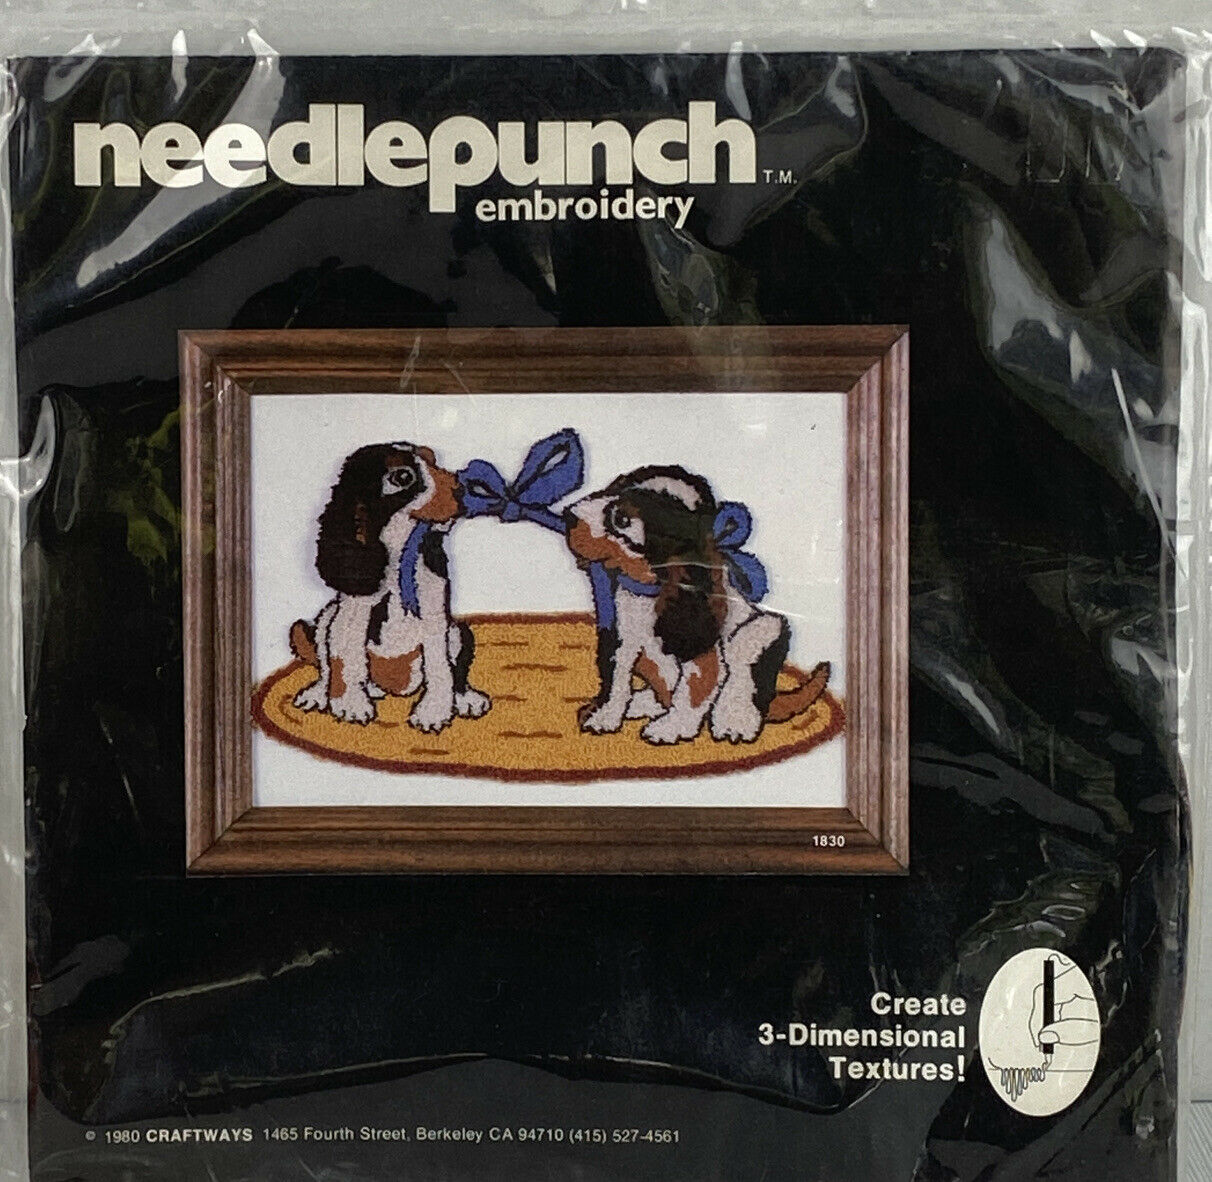 Vtg 1980 Needlepunch Embroidery Kit Puppies Dogs # 1830 Nos